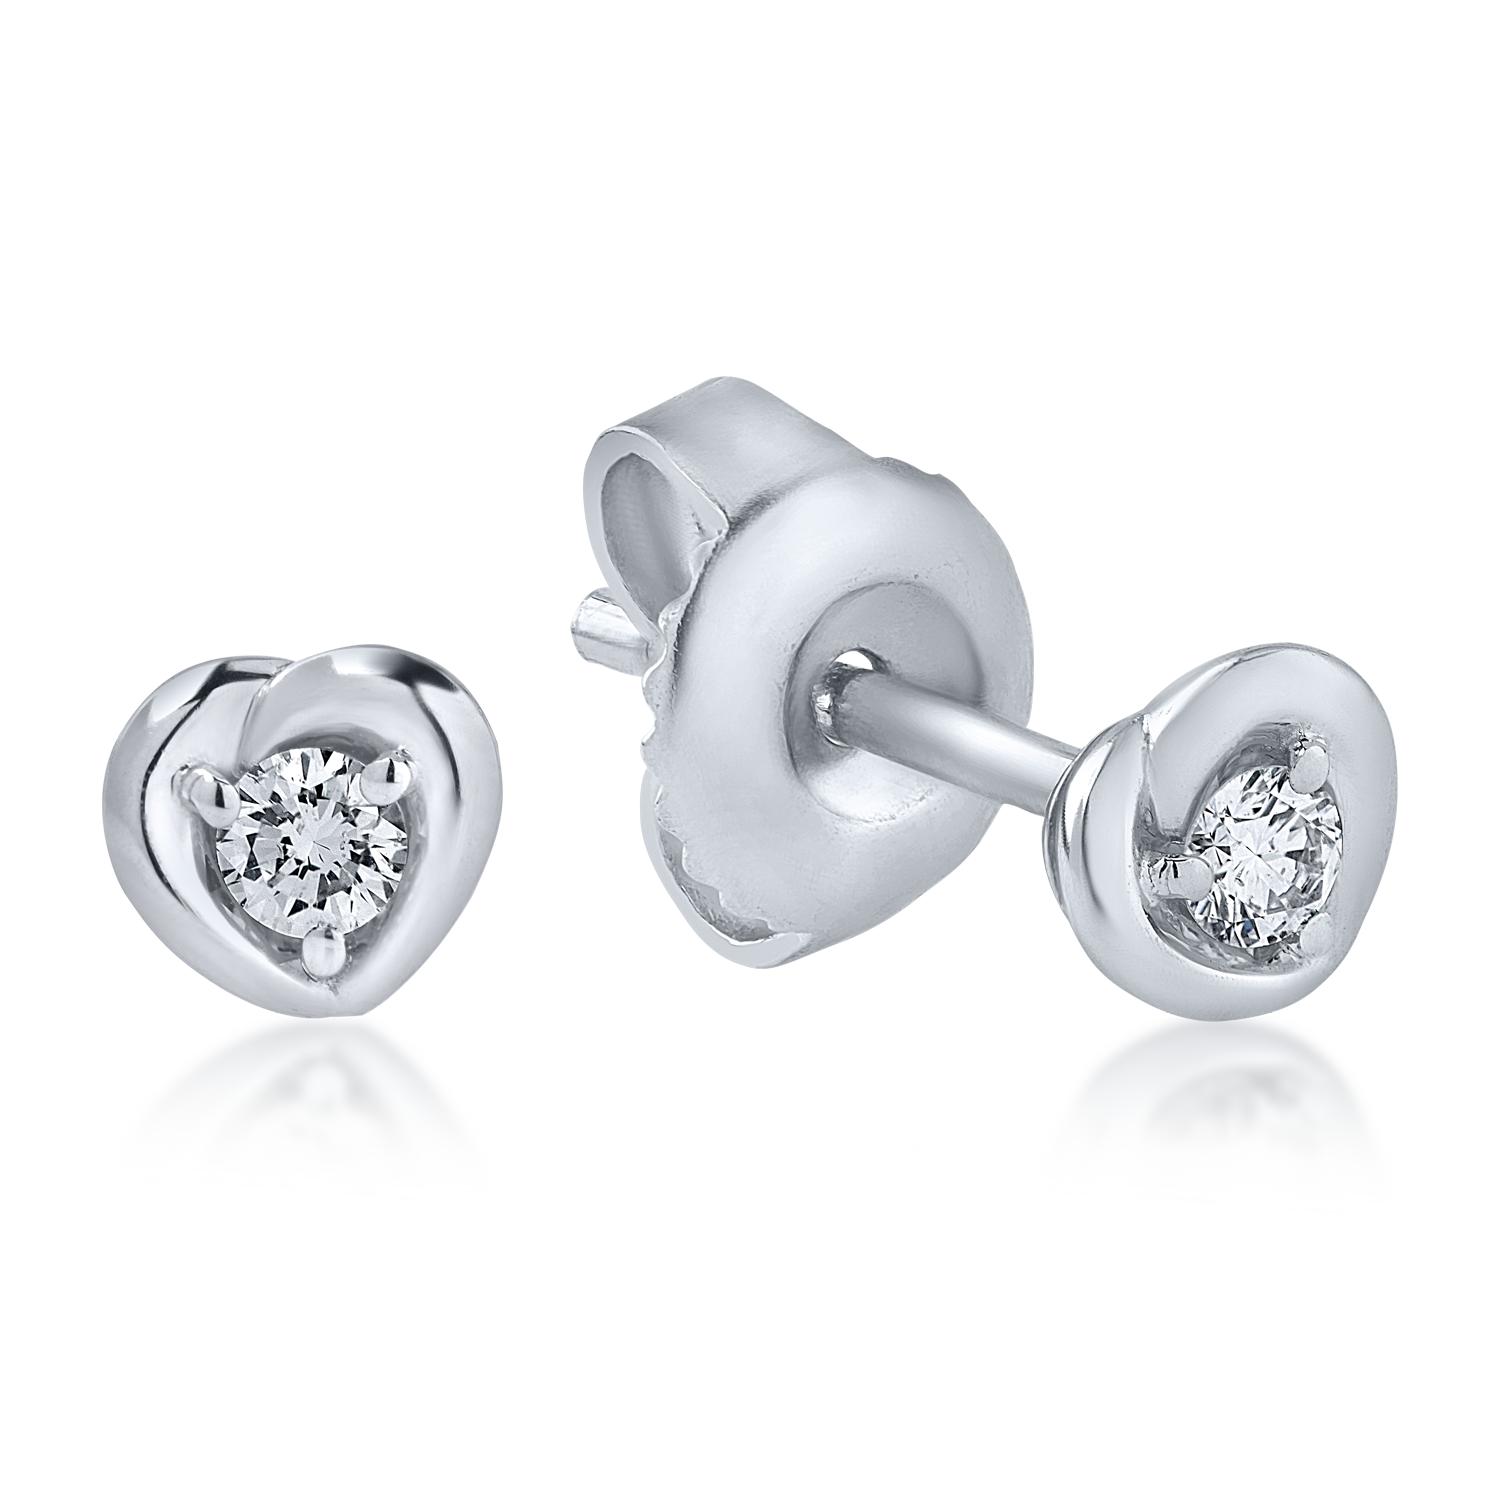 White gold earrings with 0.12ct diamonds